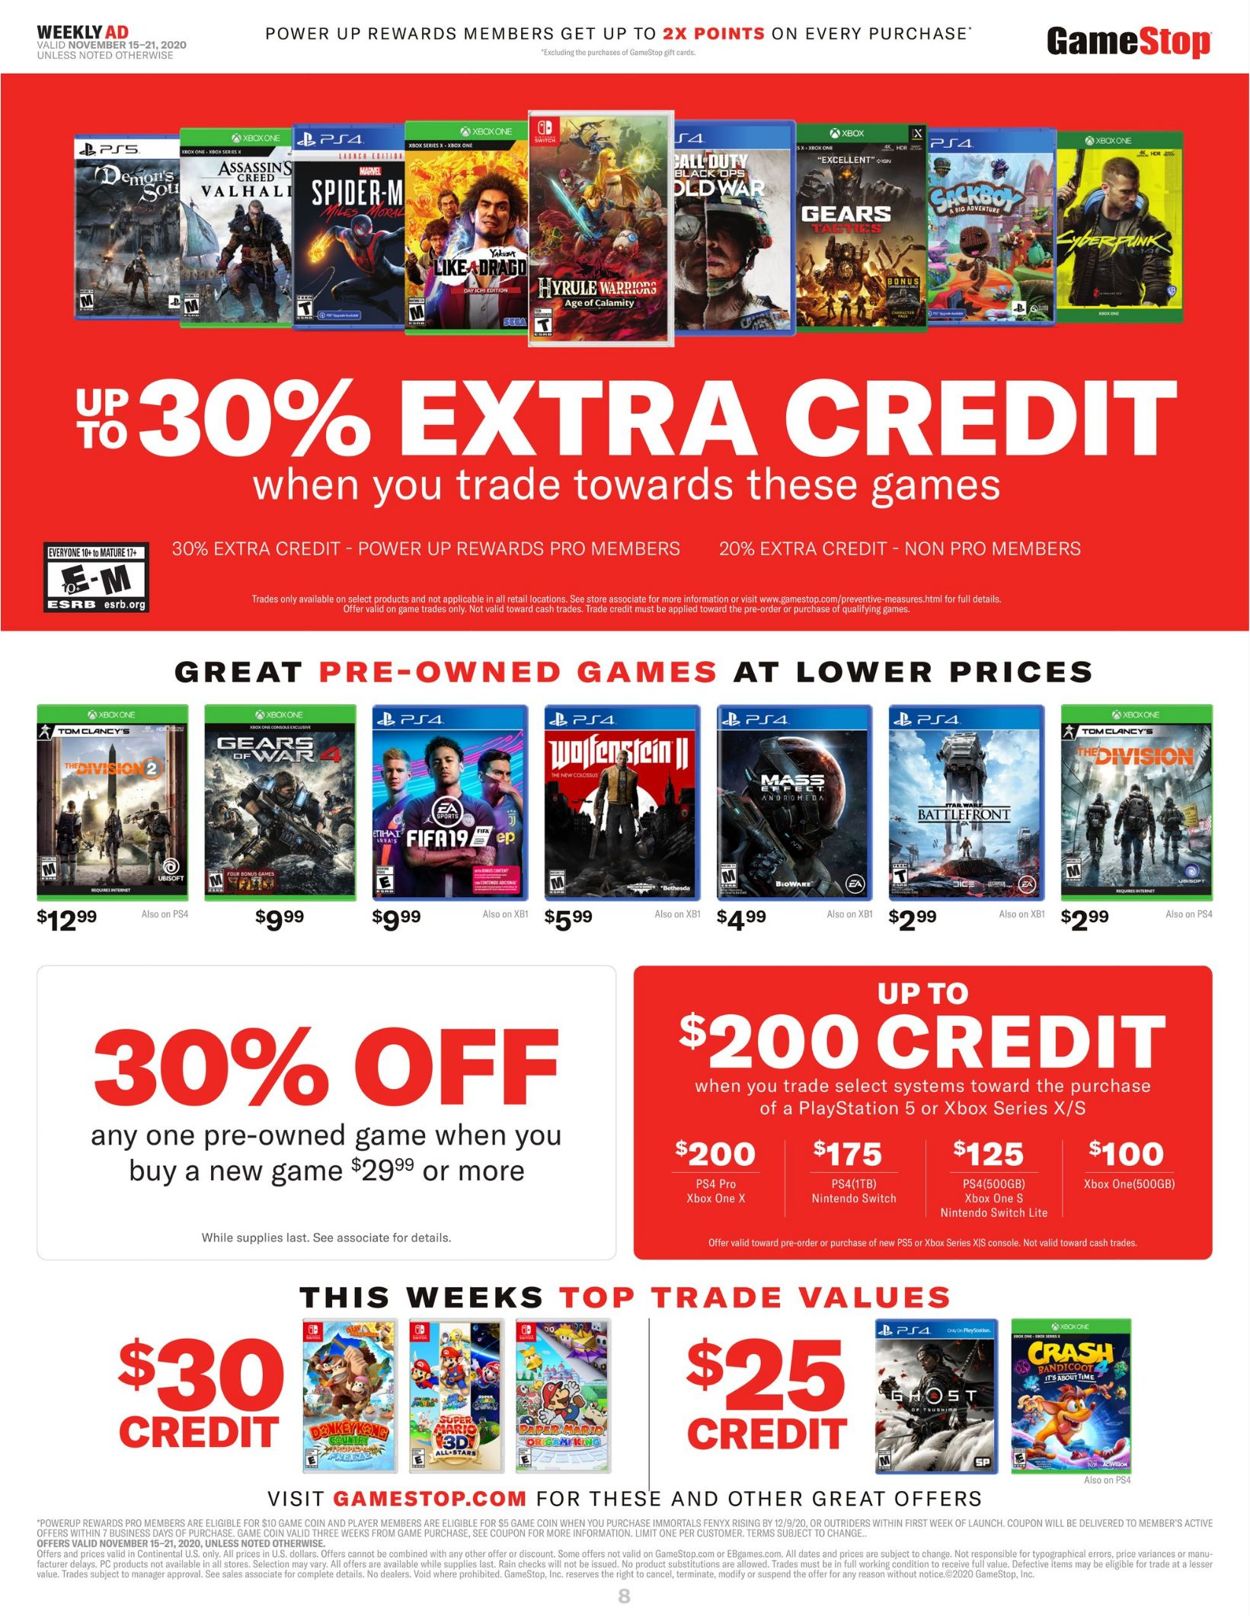 Game Stop Current weekly ad 11/15 - 11/21/2020 [8] - frequent-ads.com